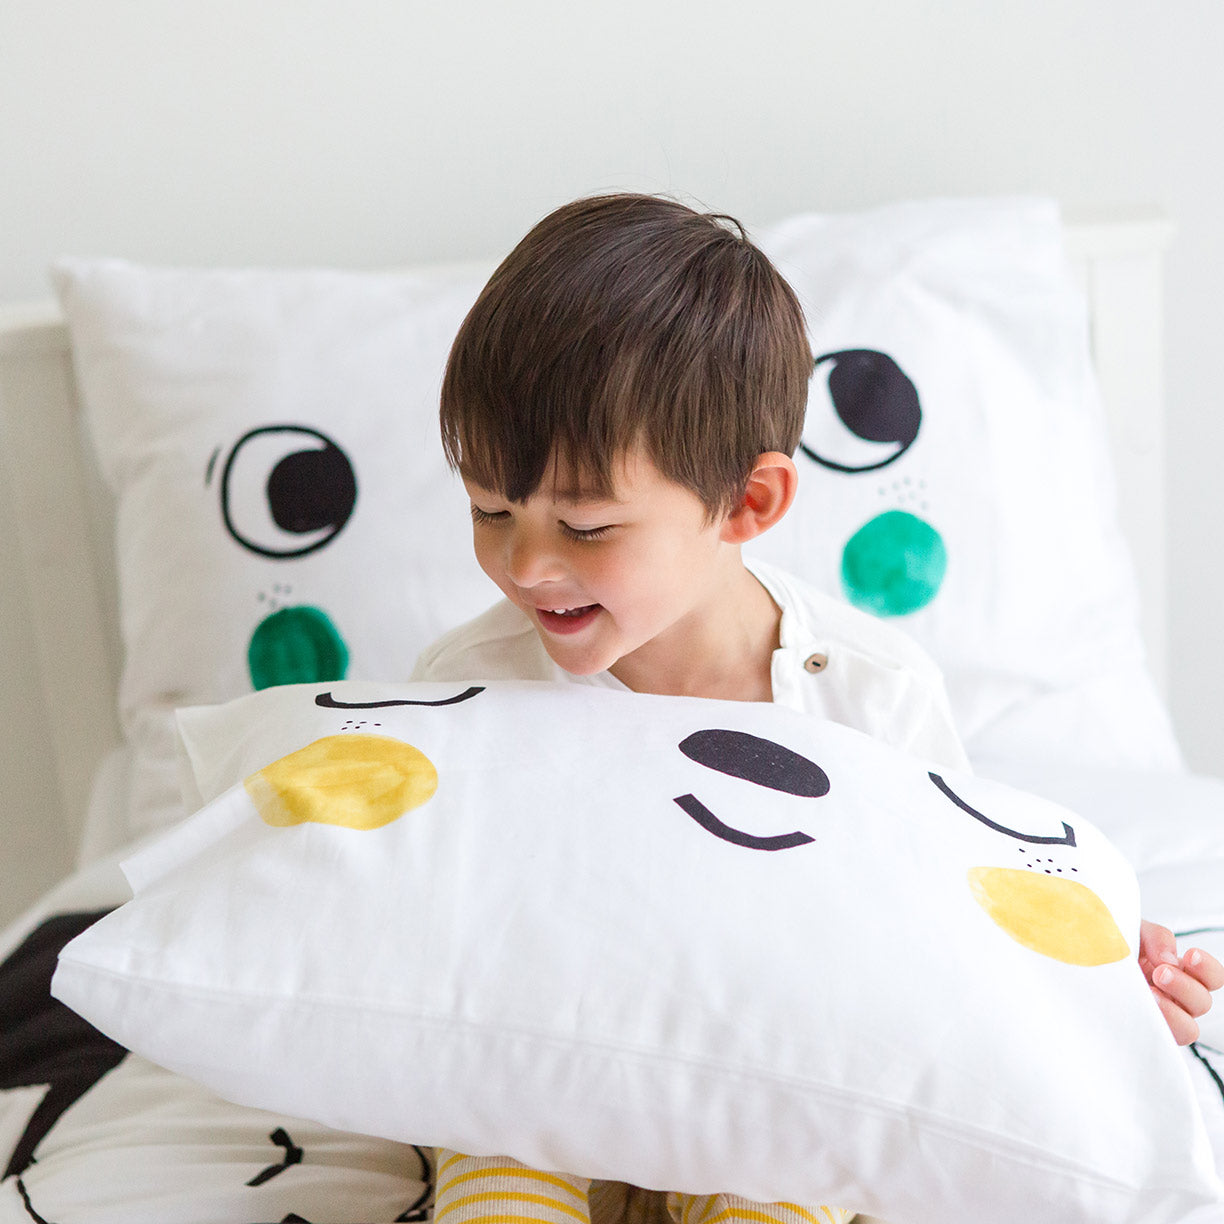 2-pack Happy Faces Standard Size Pillowcases